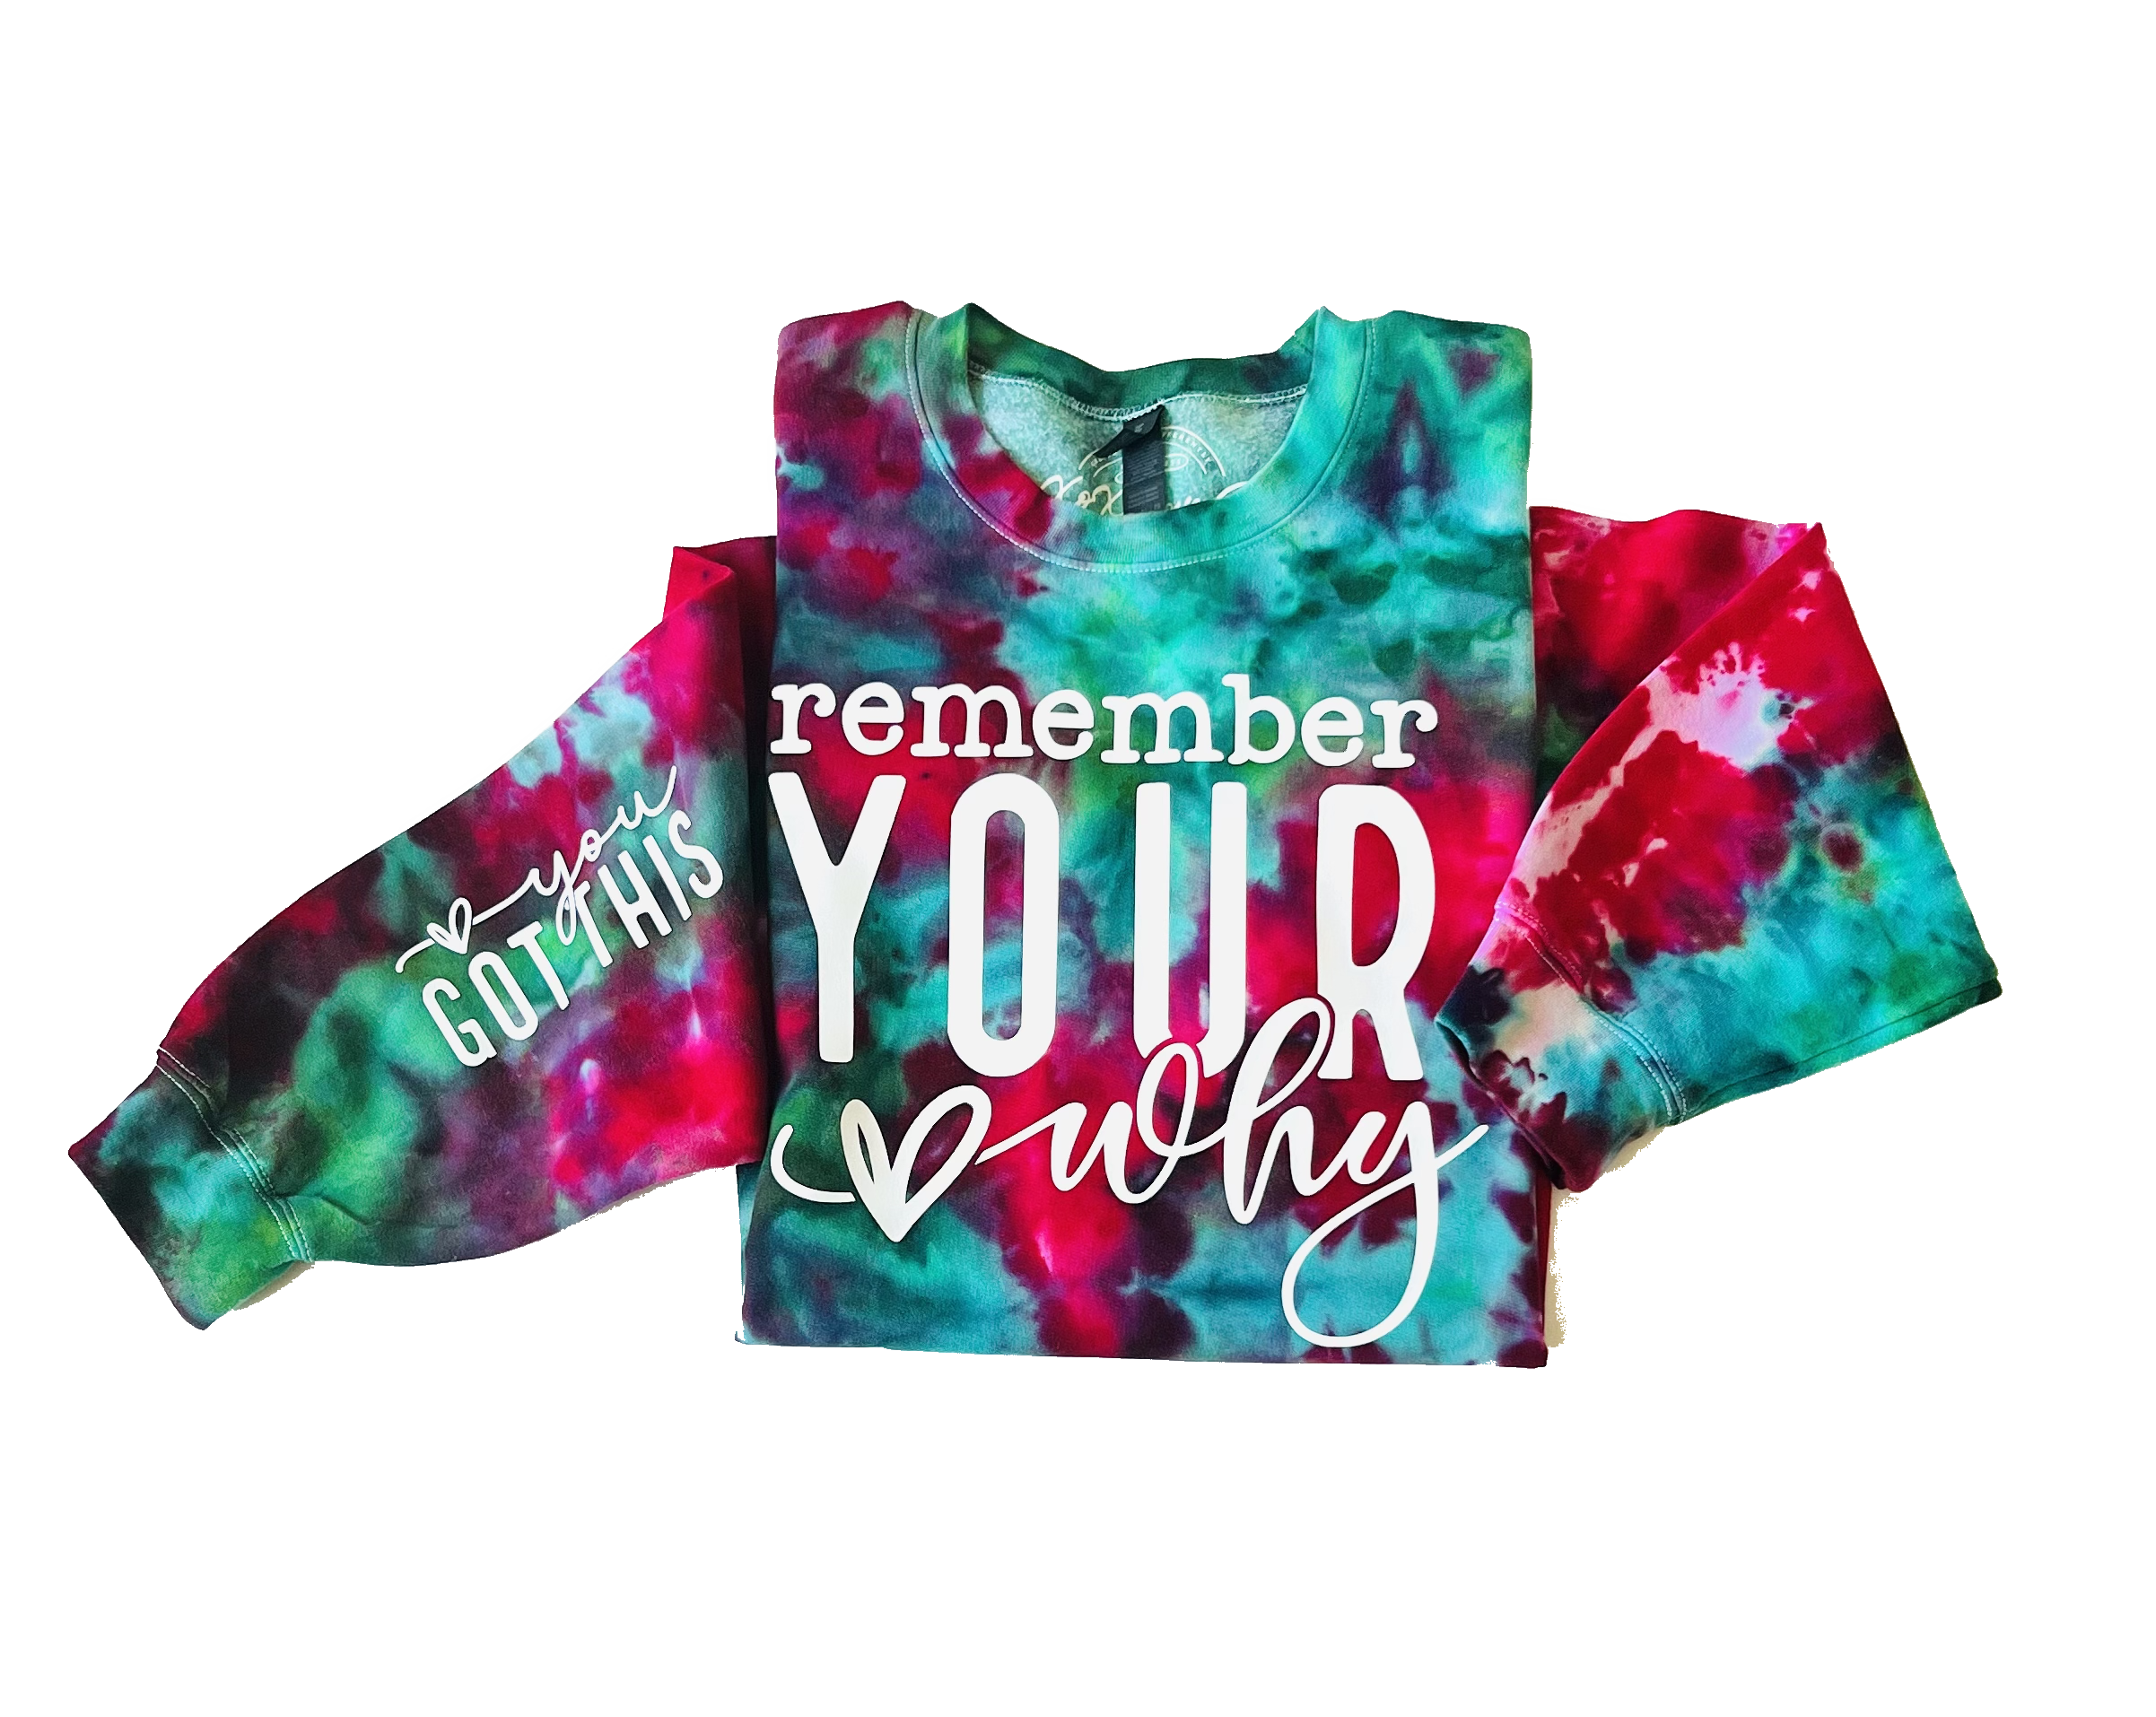 remember your why sweatshirt green dark pink Christmas theme tie dye custom fall colors winter colors motivation inspiration hopeful sayings phrases reminder positive affirmations spiritual message gift giving ideas birthdays holidays love aspiring inspiring be kind screen print transfers positivity powerful  woman you got this customize tees diy style streetwear bleached shirts cool clothing funny sayings shopping vacation date night adult humor closet grwm graphic tshirts  cutting ideas